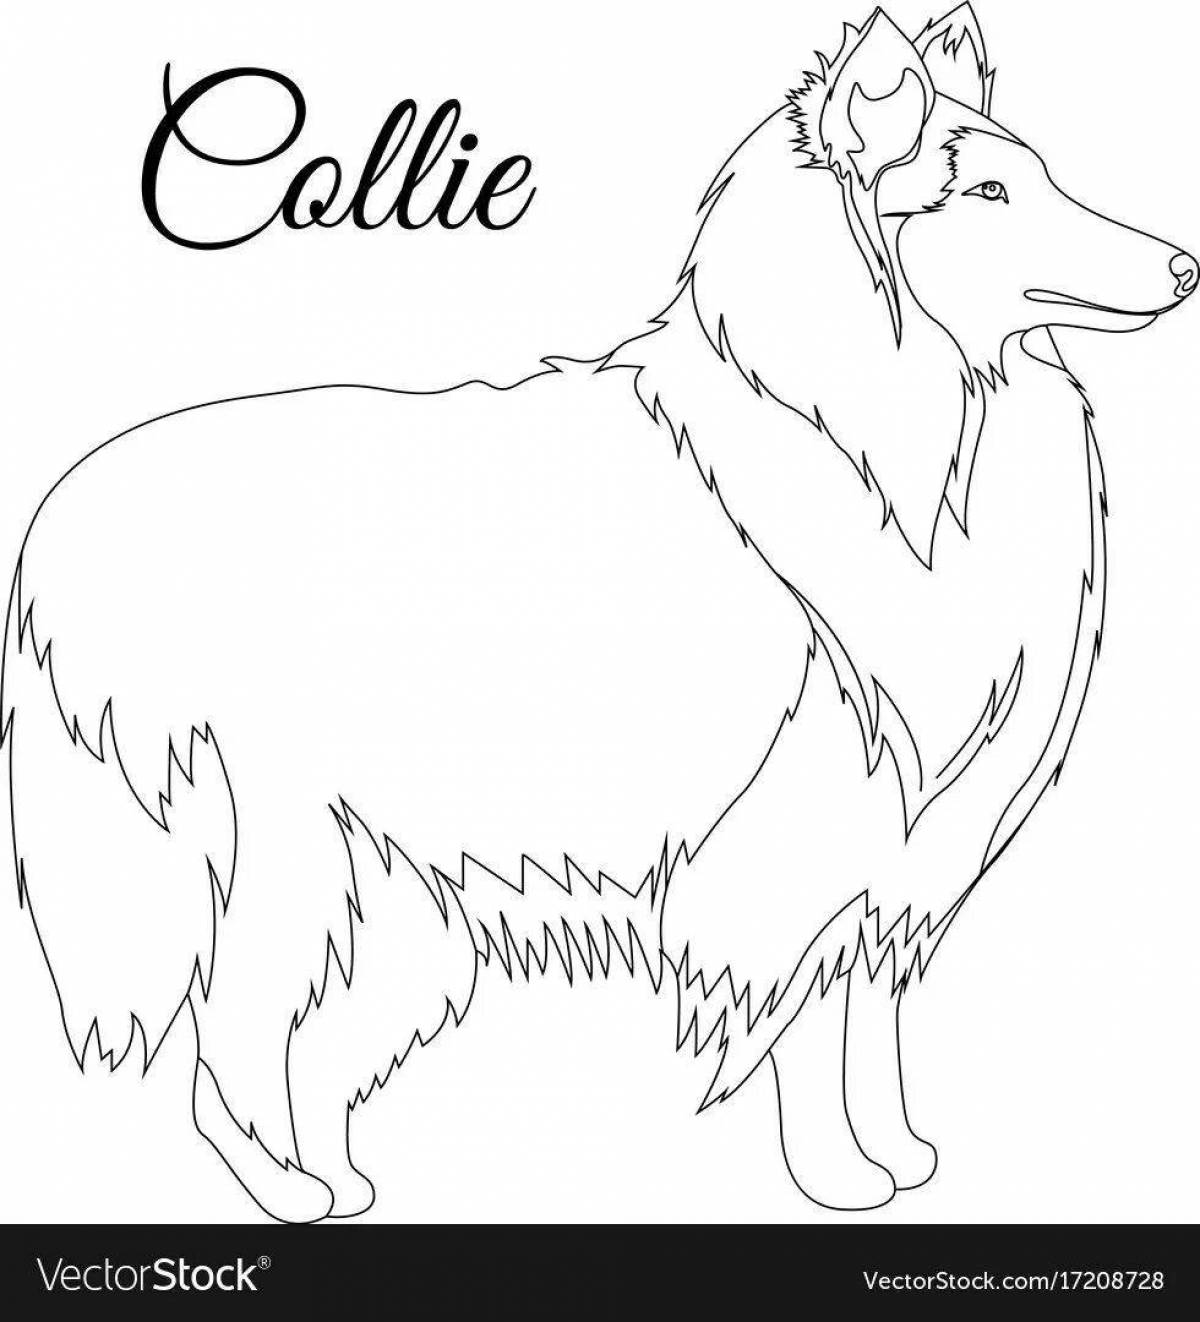 Majestic collie coloring page